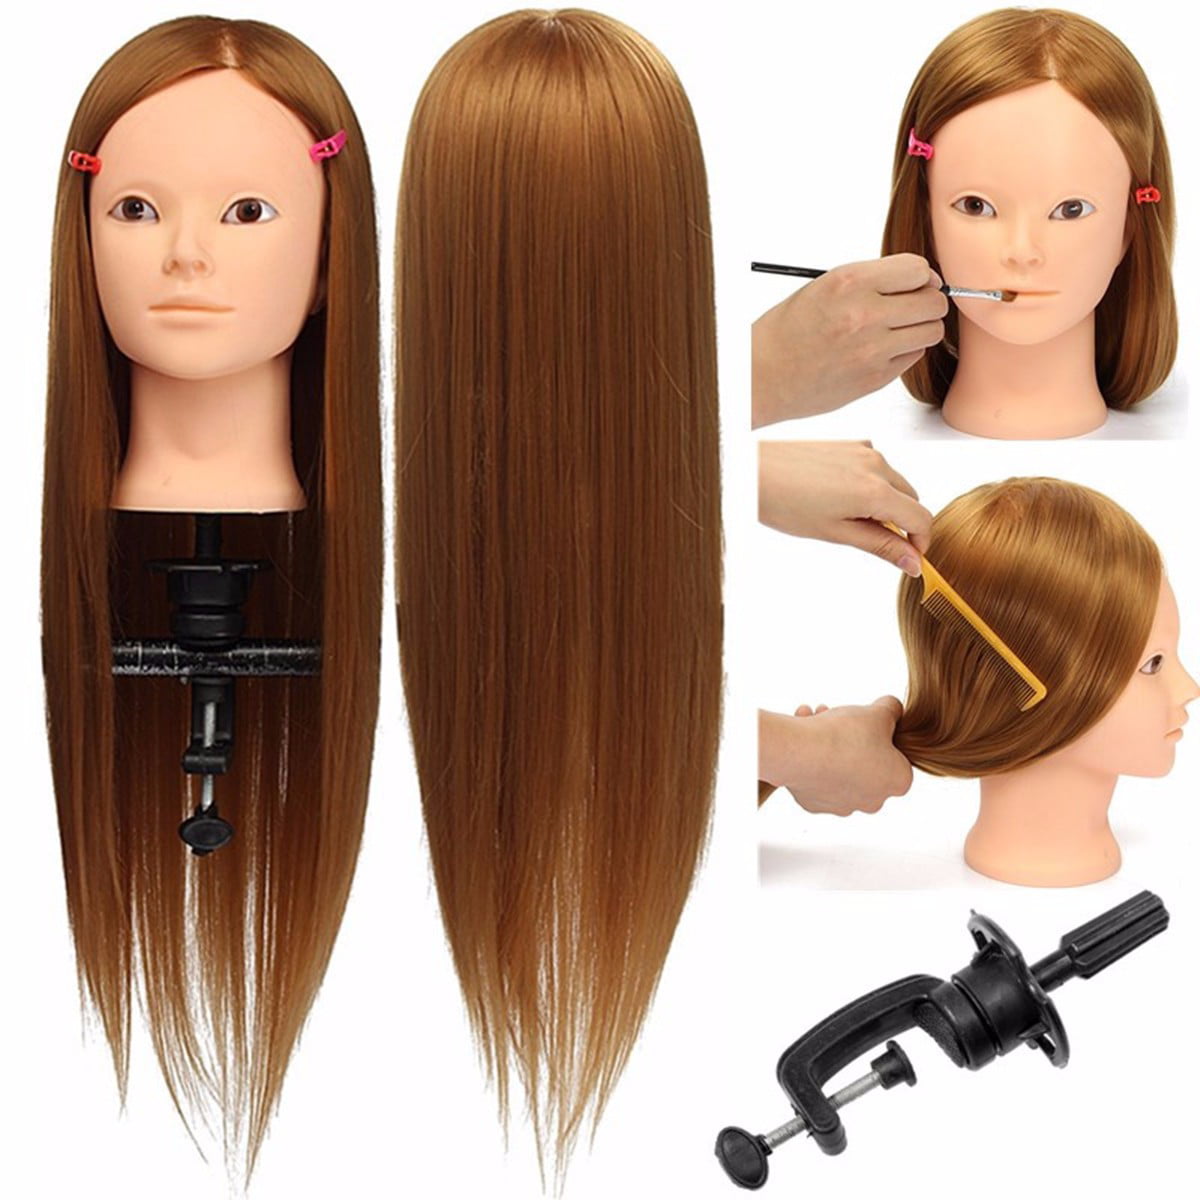 Makeup Practice Training Head With 30% Real Hair - Mannequin Head Salon